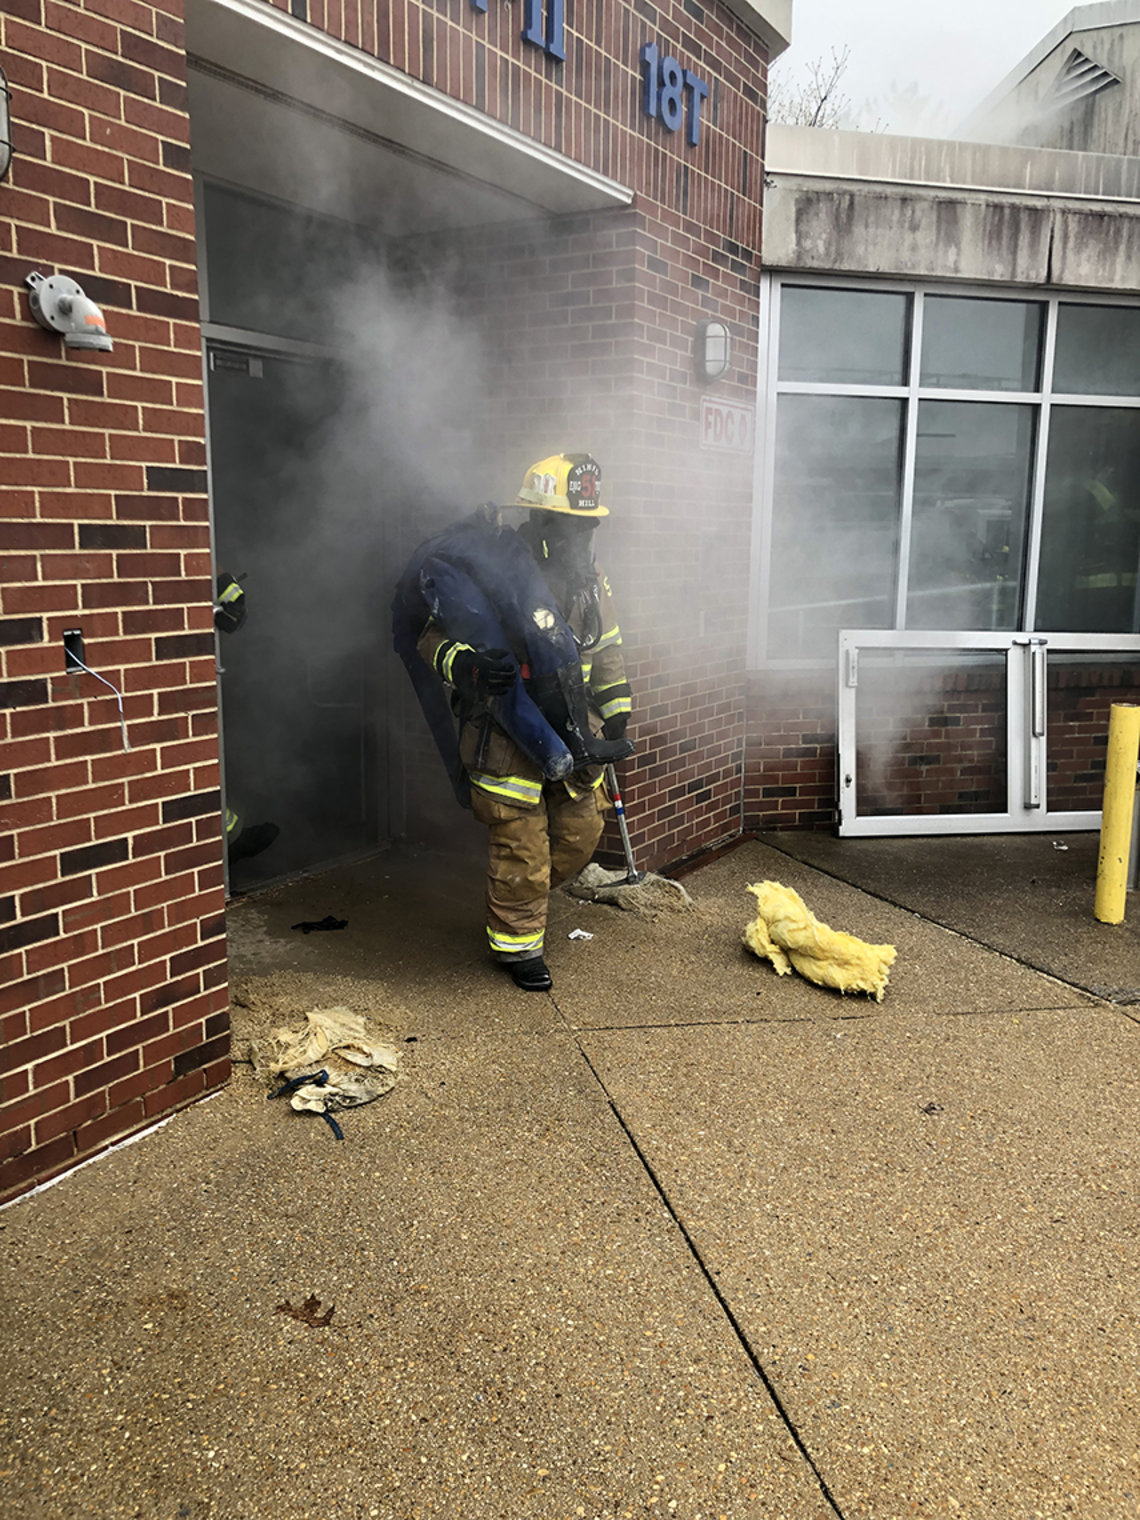 Surrounded by smoke, firefighter in full gear and helmet exits building with dummy on shoulder